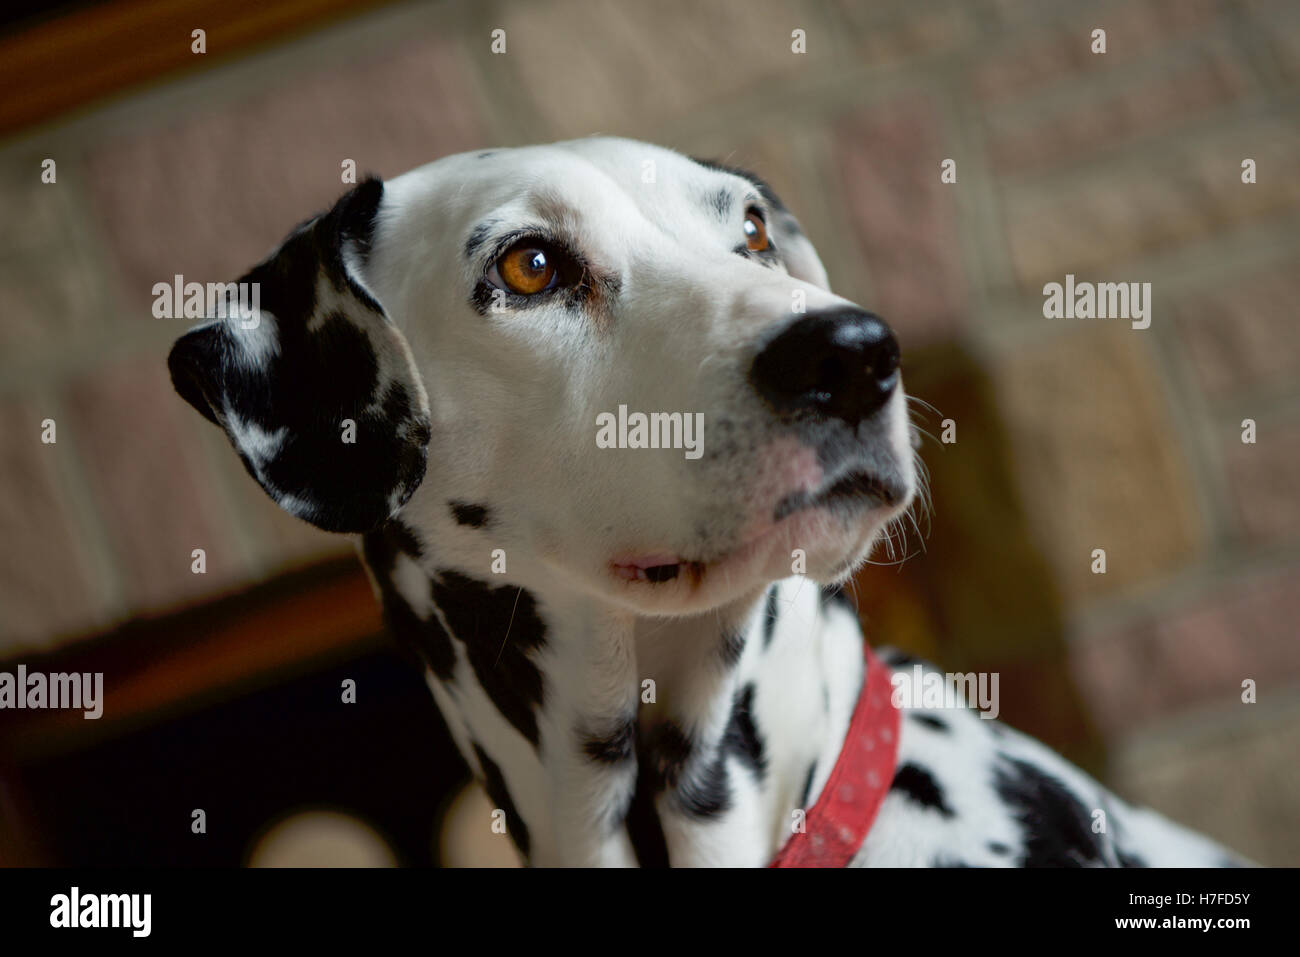 A Dalmatian dog, bright eyed and thoughtful. Stock Photo